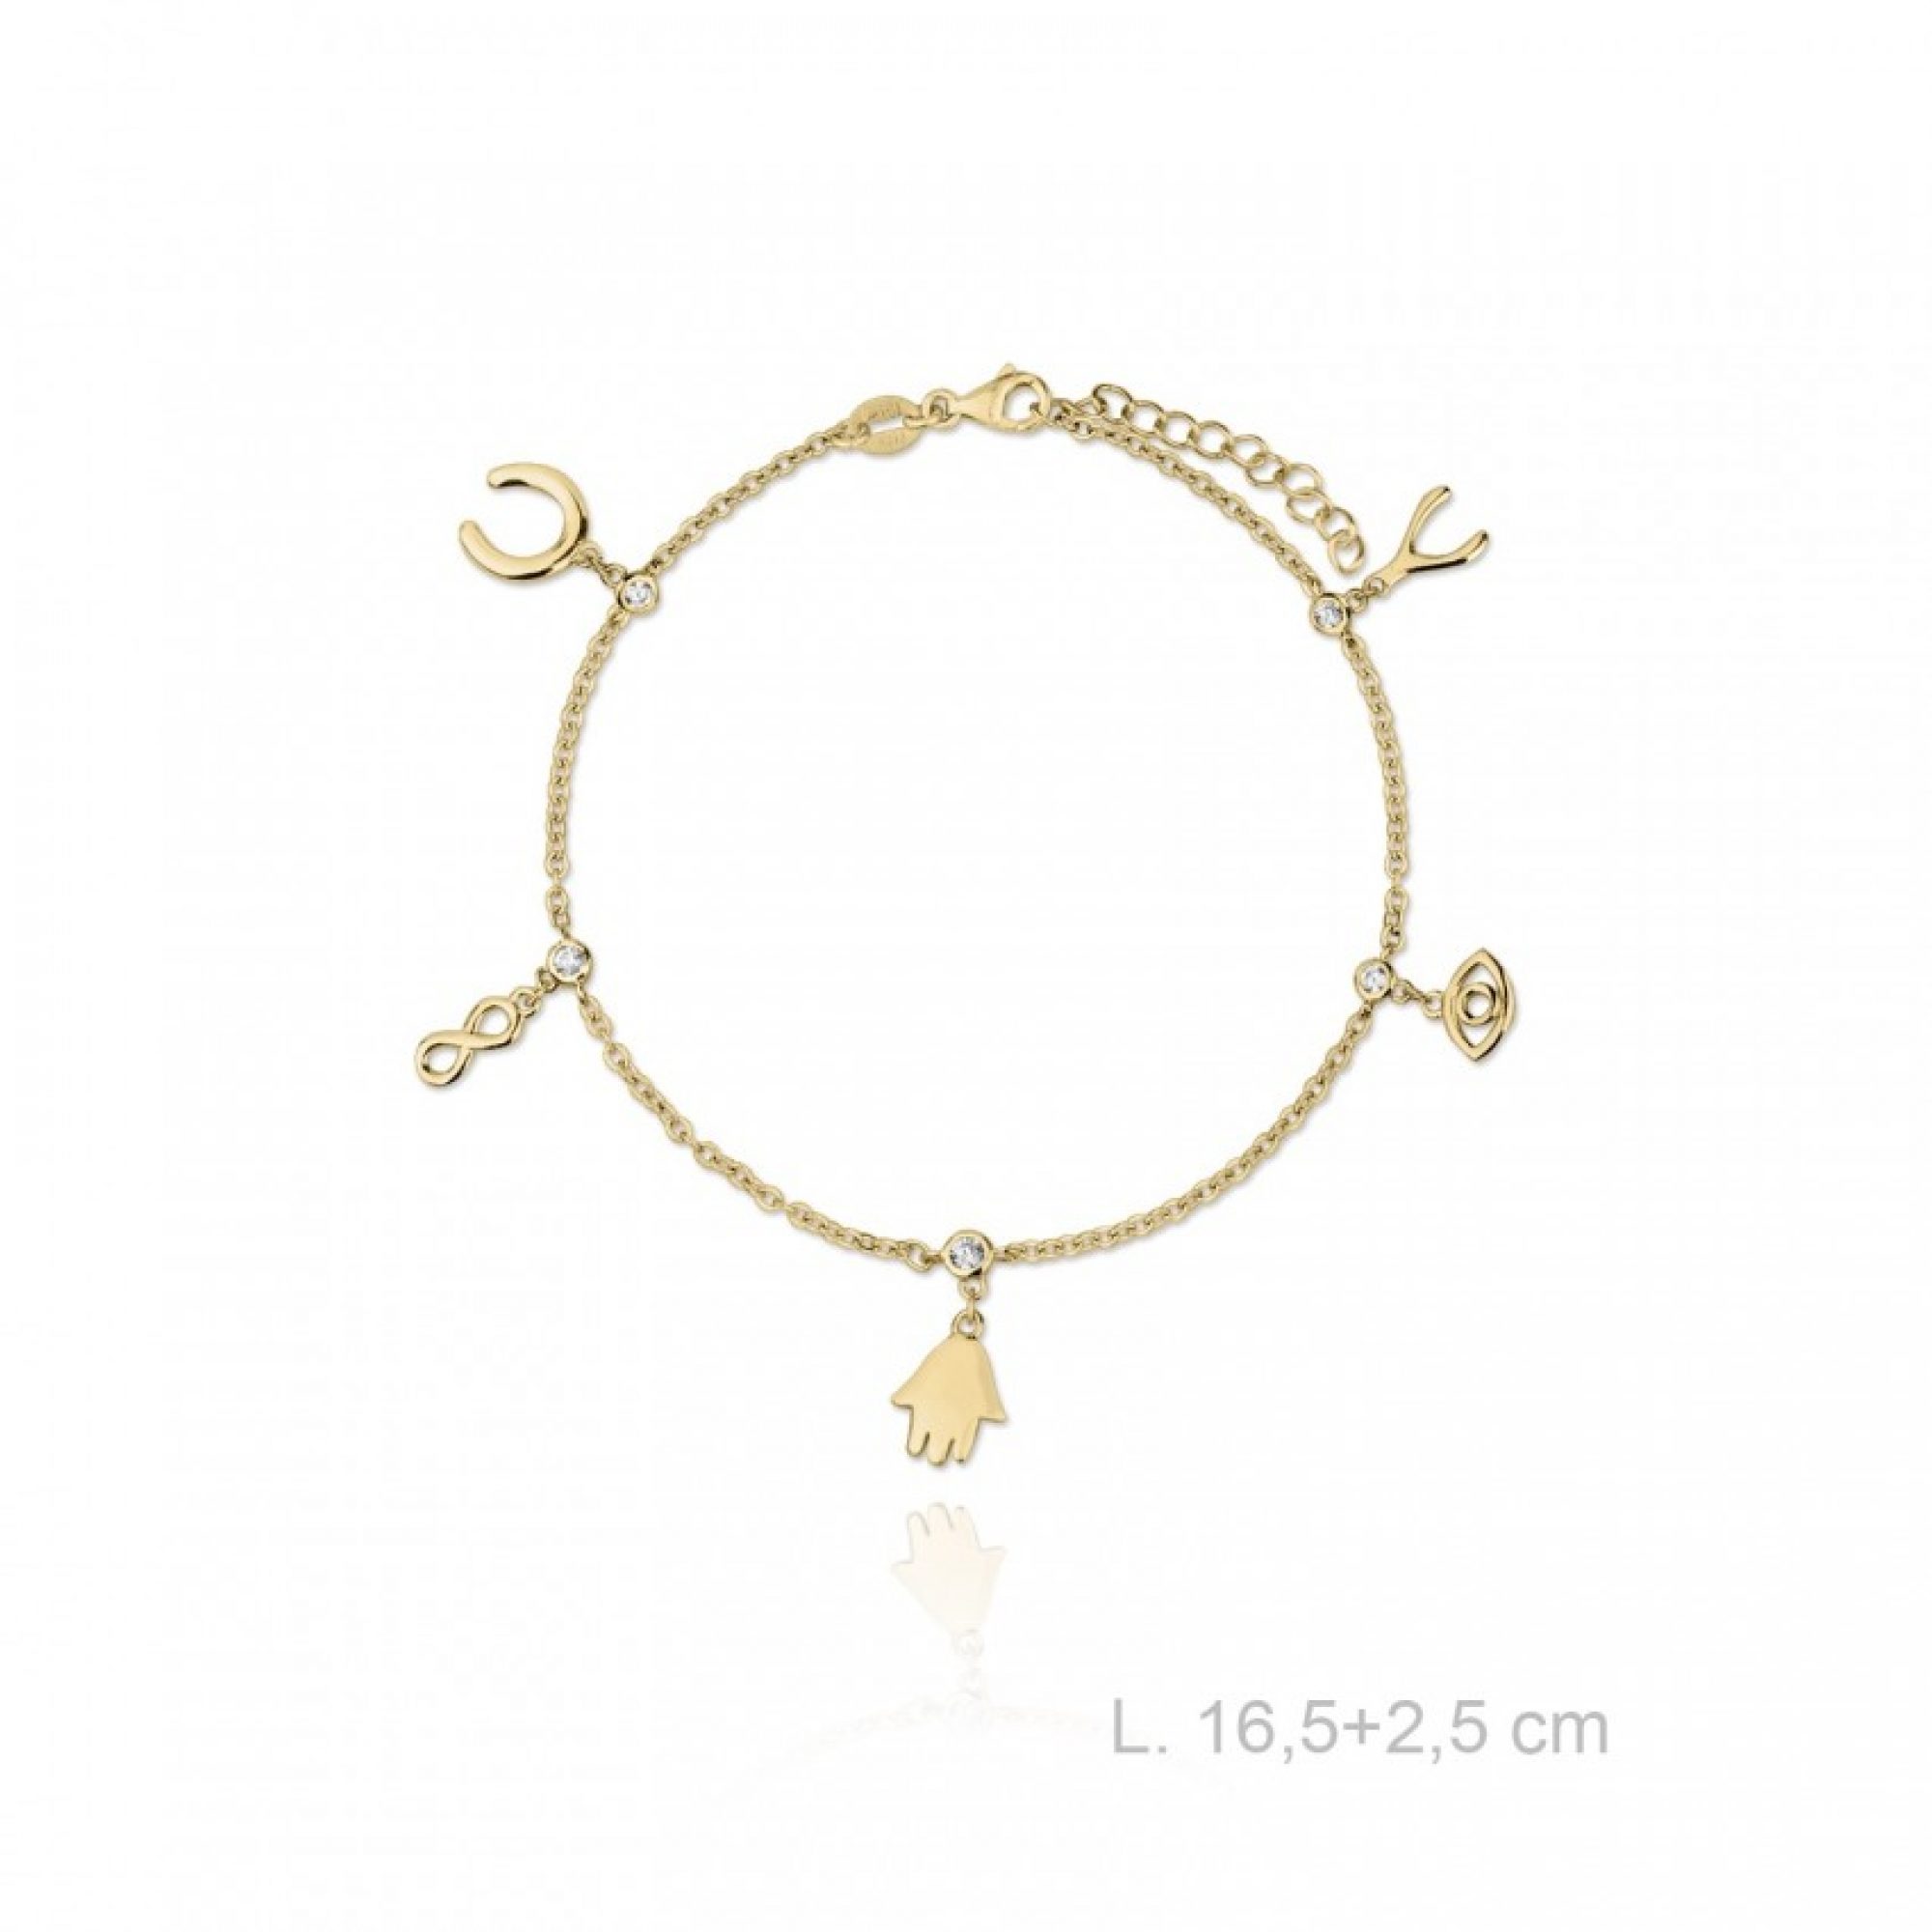 Gold plated bracelet with lucky charms and zircon stones